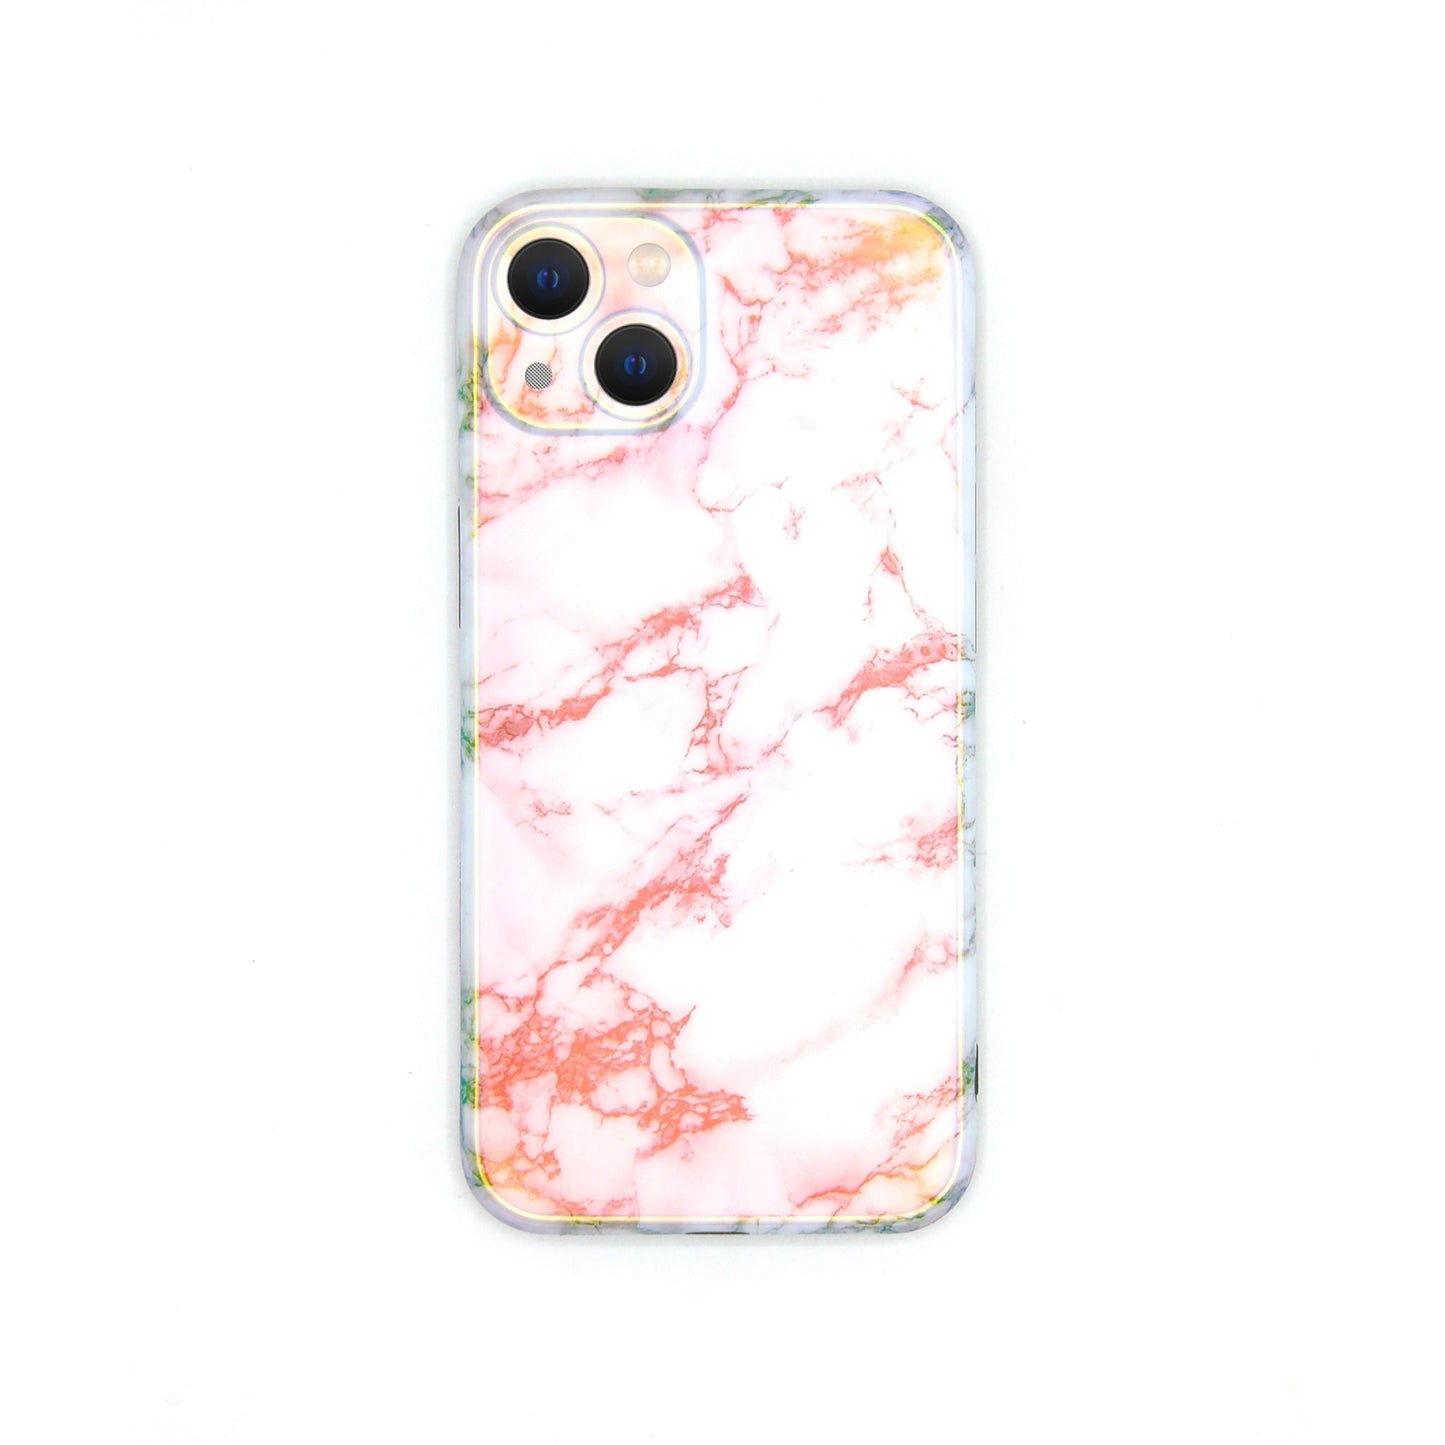 Marble Silicon Cover For Iphone